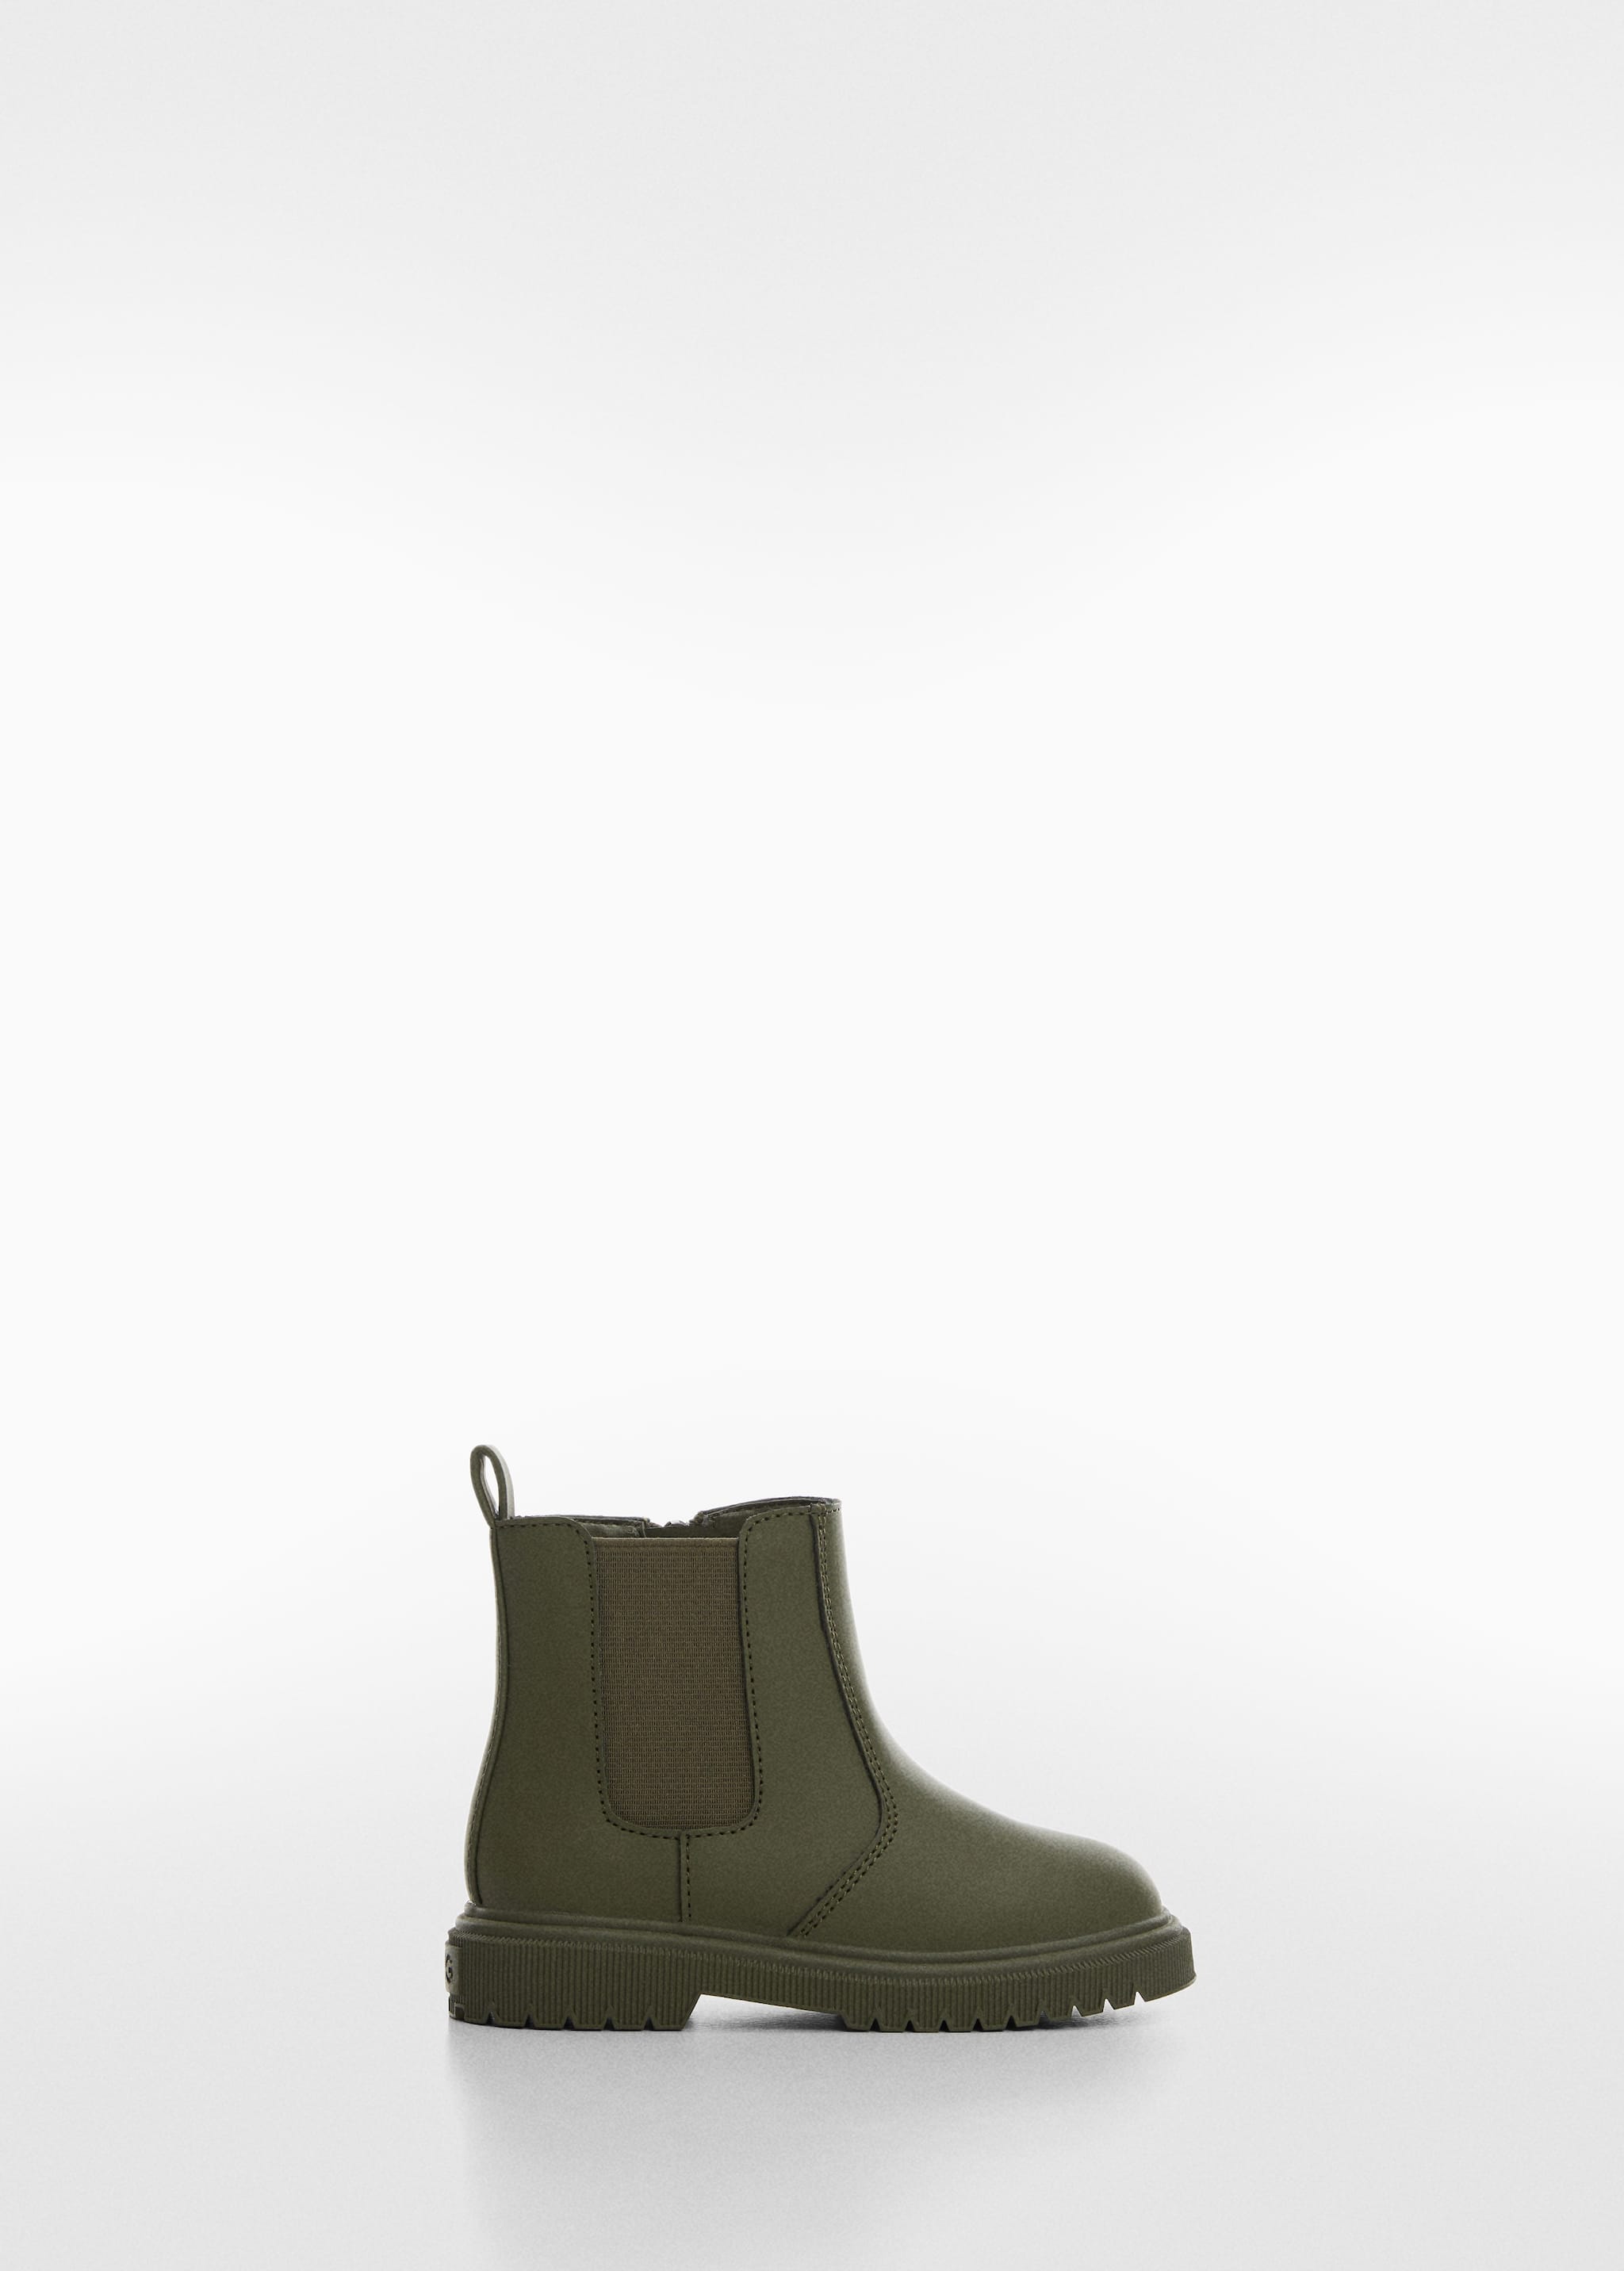 Chelsea boots - Article without model